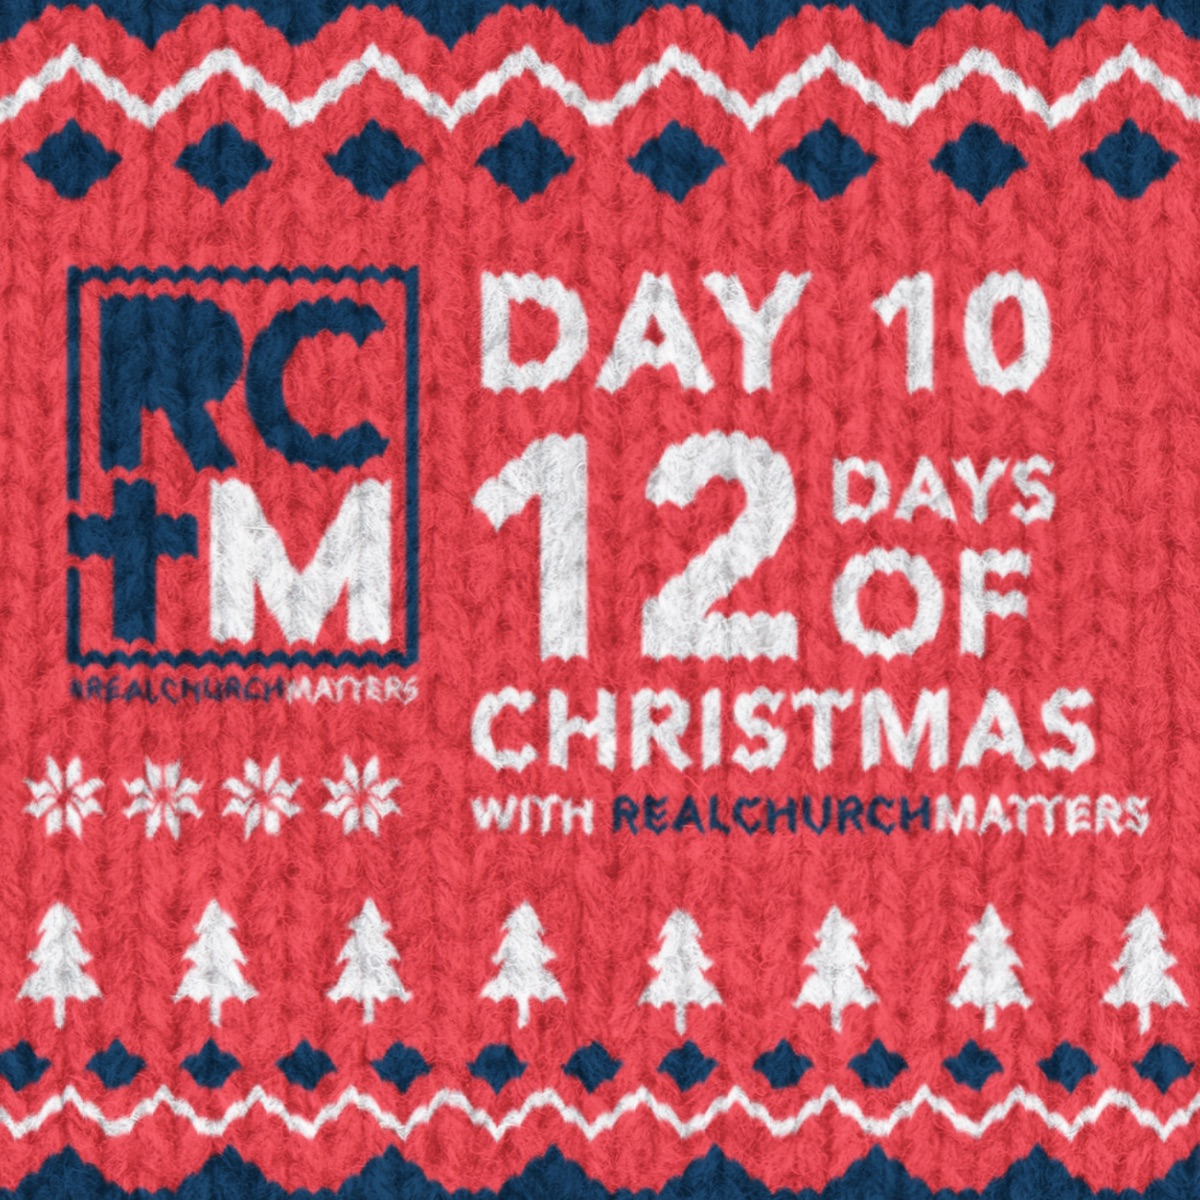 Day 10 - 12 Days of Christmas with Real Church Matters